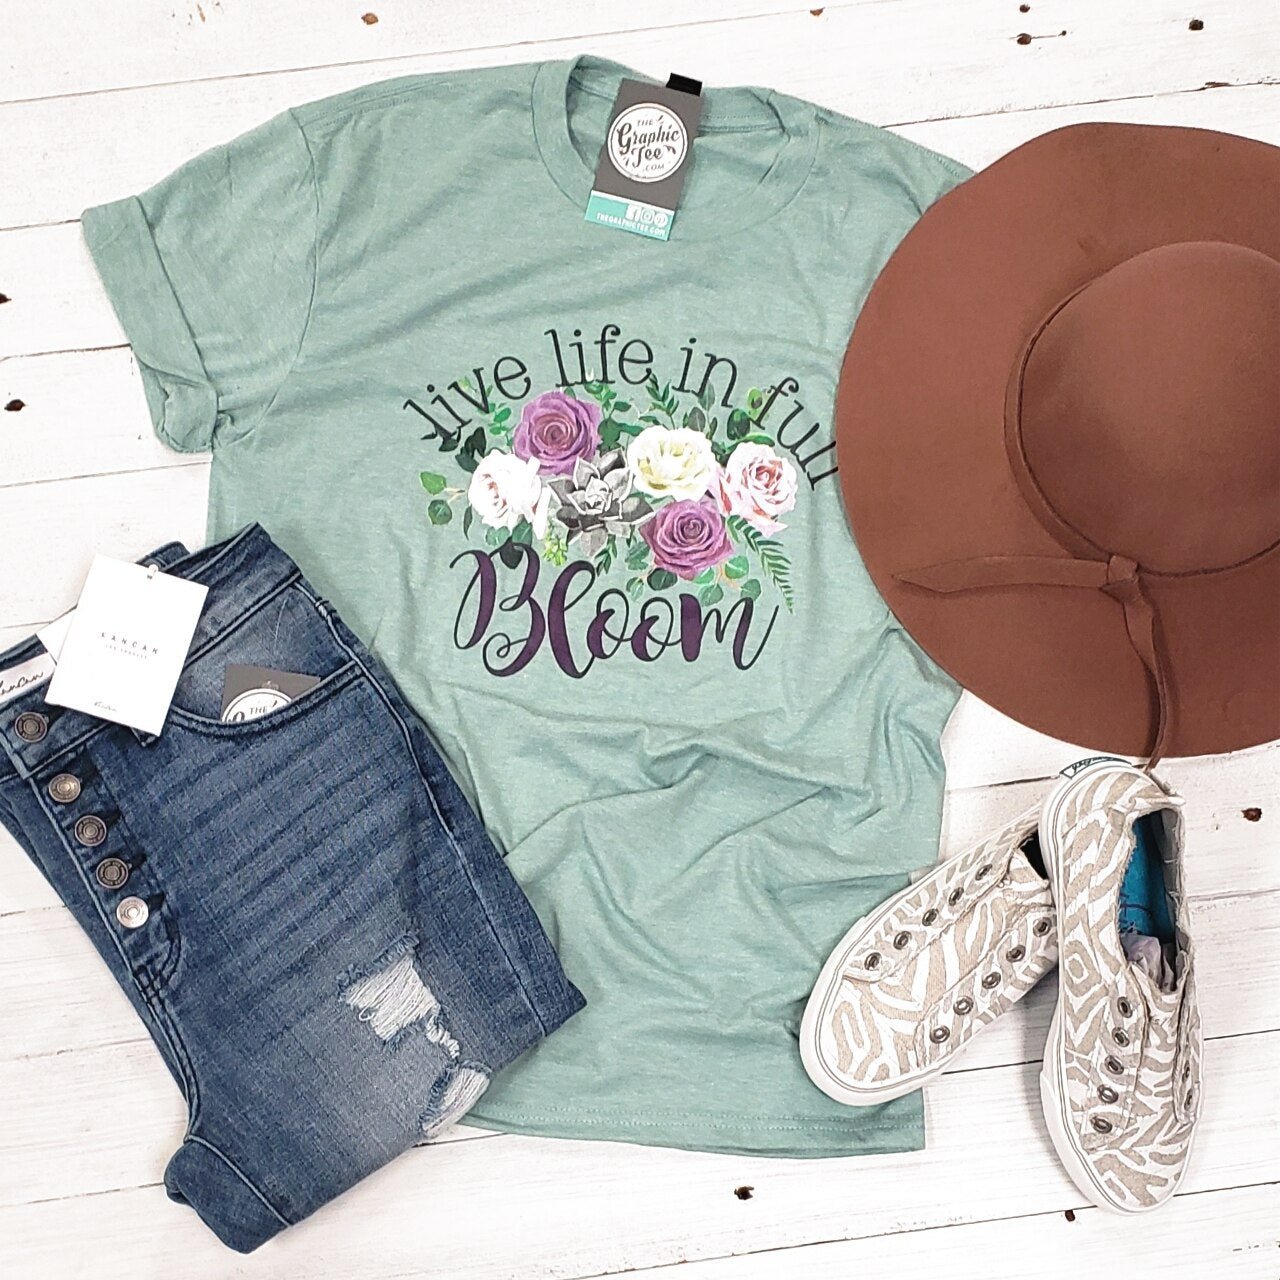 Live Life in Full Bloom - Adult Tee - The Graphic Tee